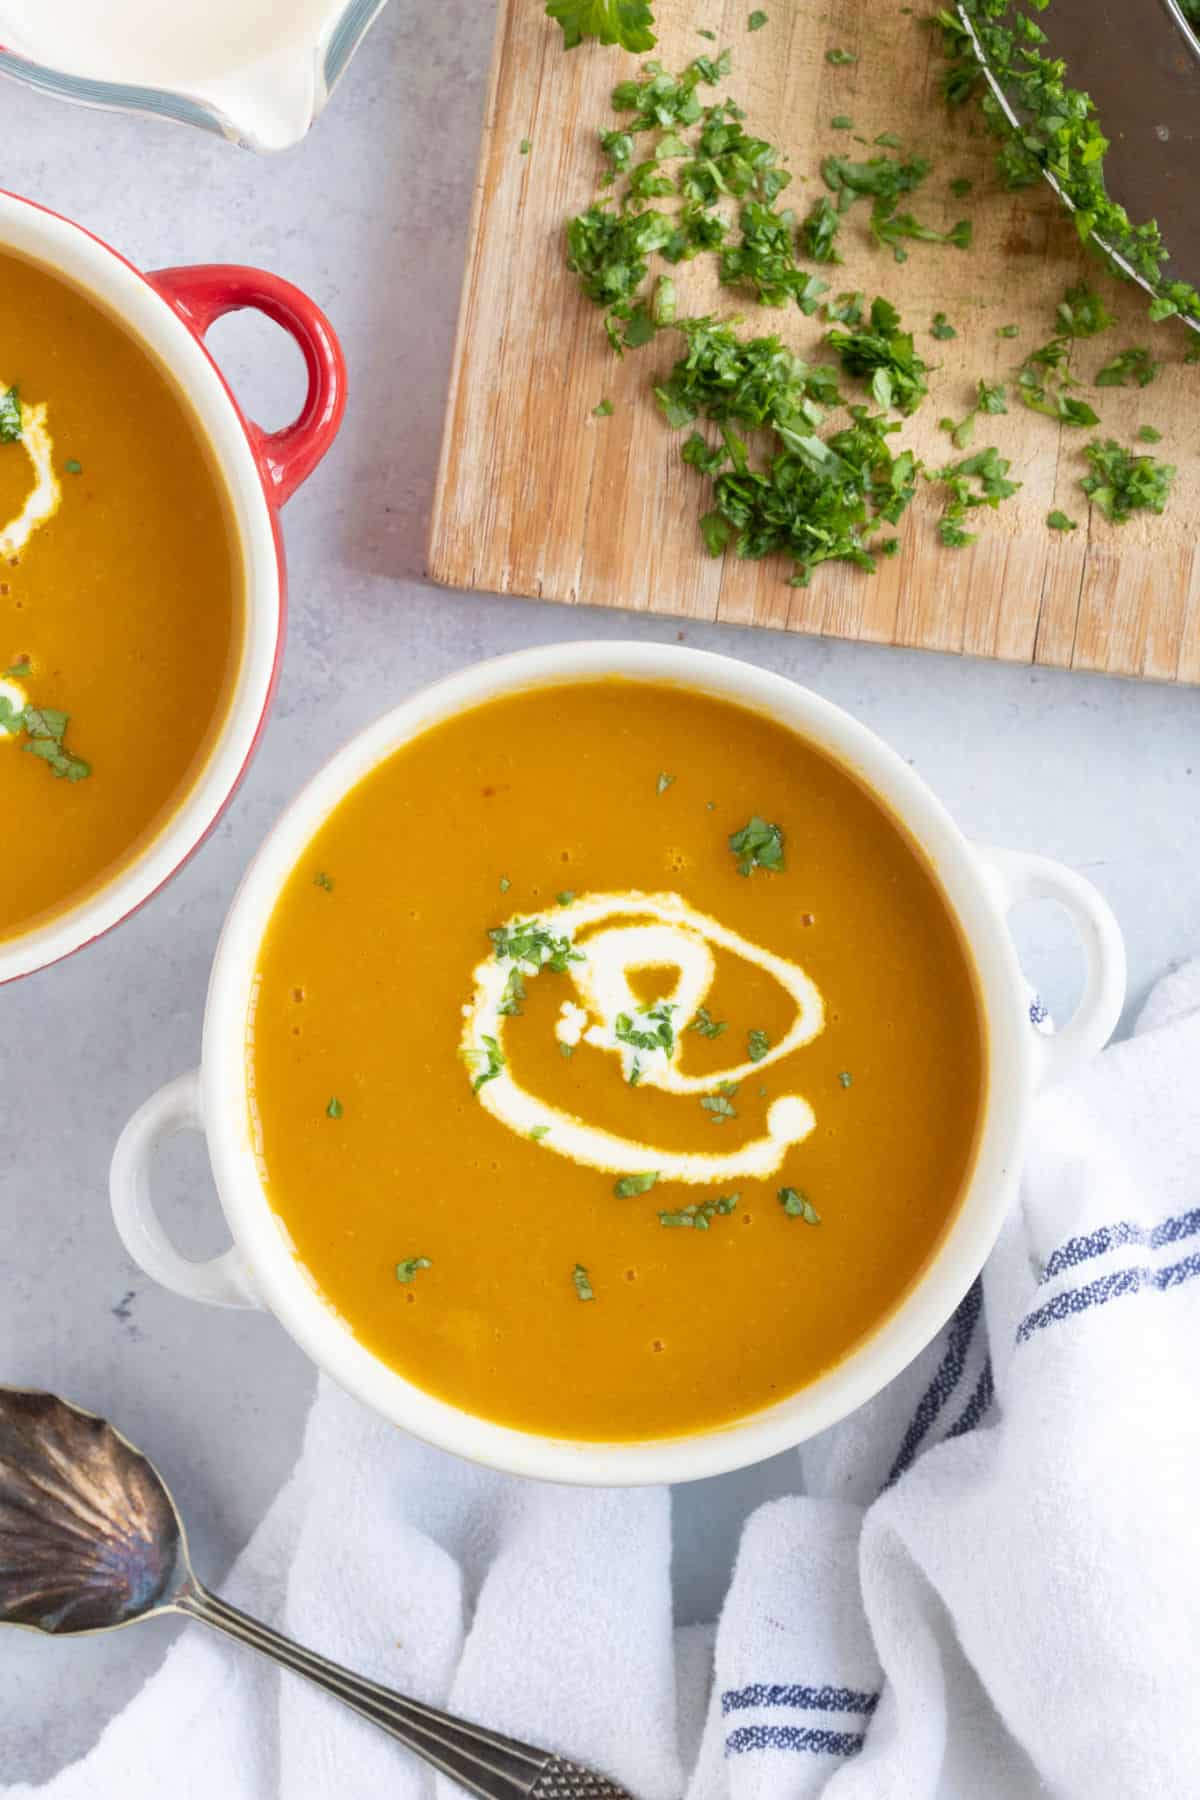 A bowl of spiced carrot and parsnip soup garnished with parsley.